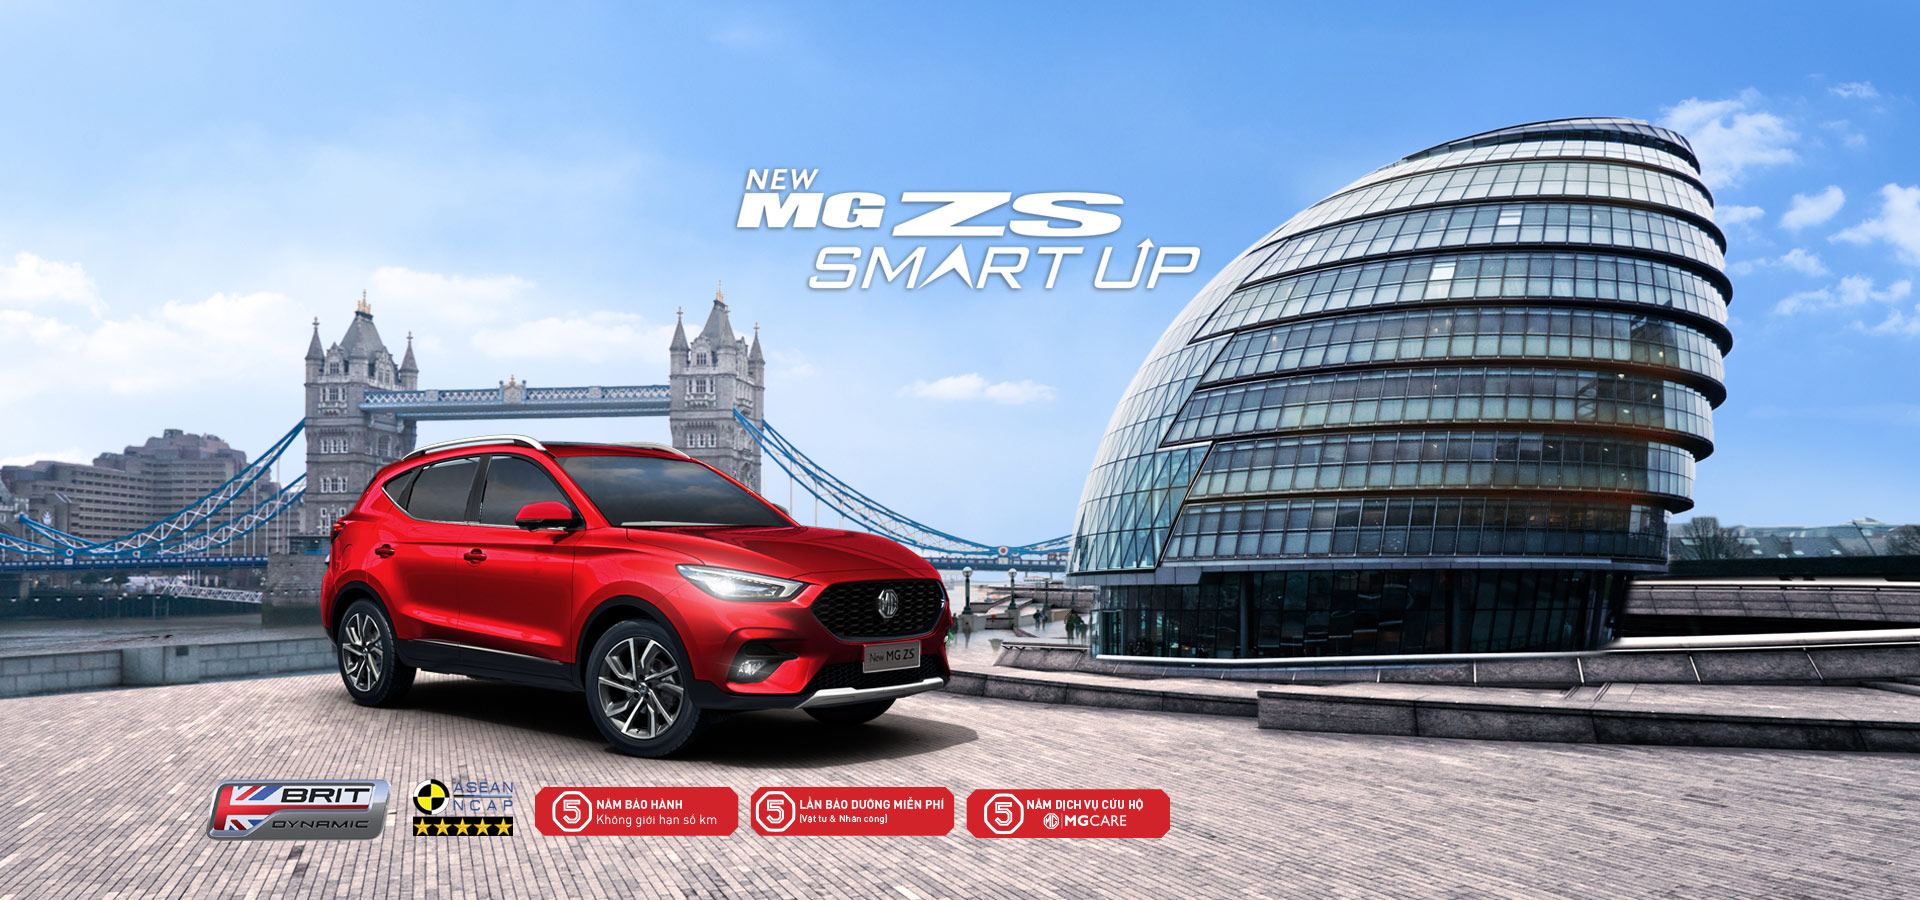 new-mg-zs-banner-1